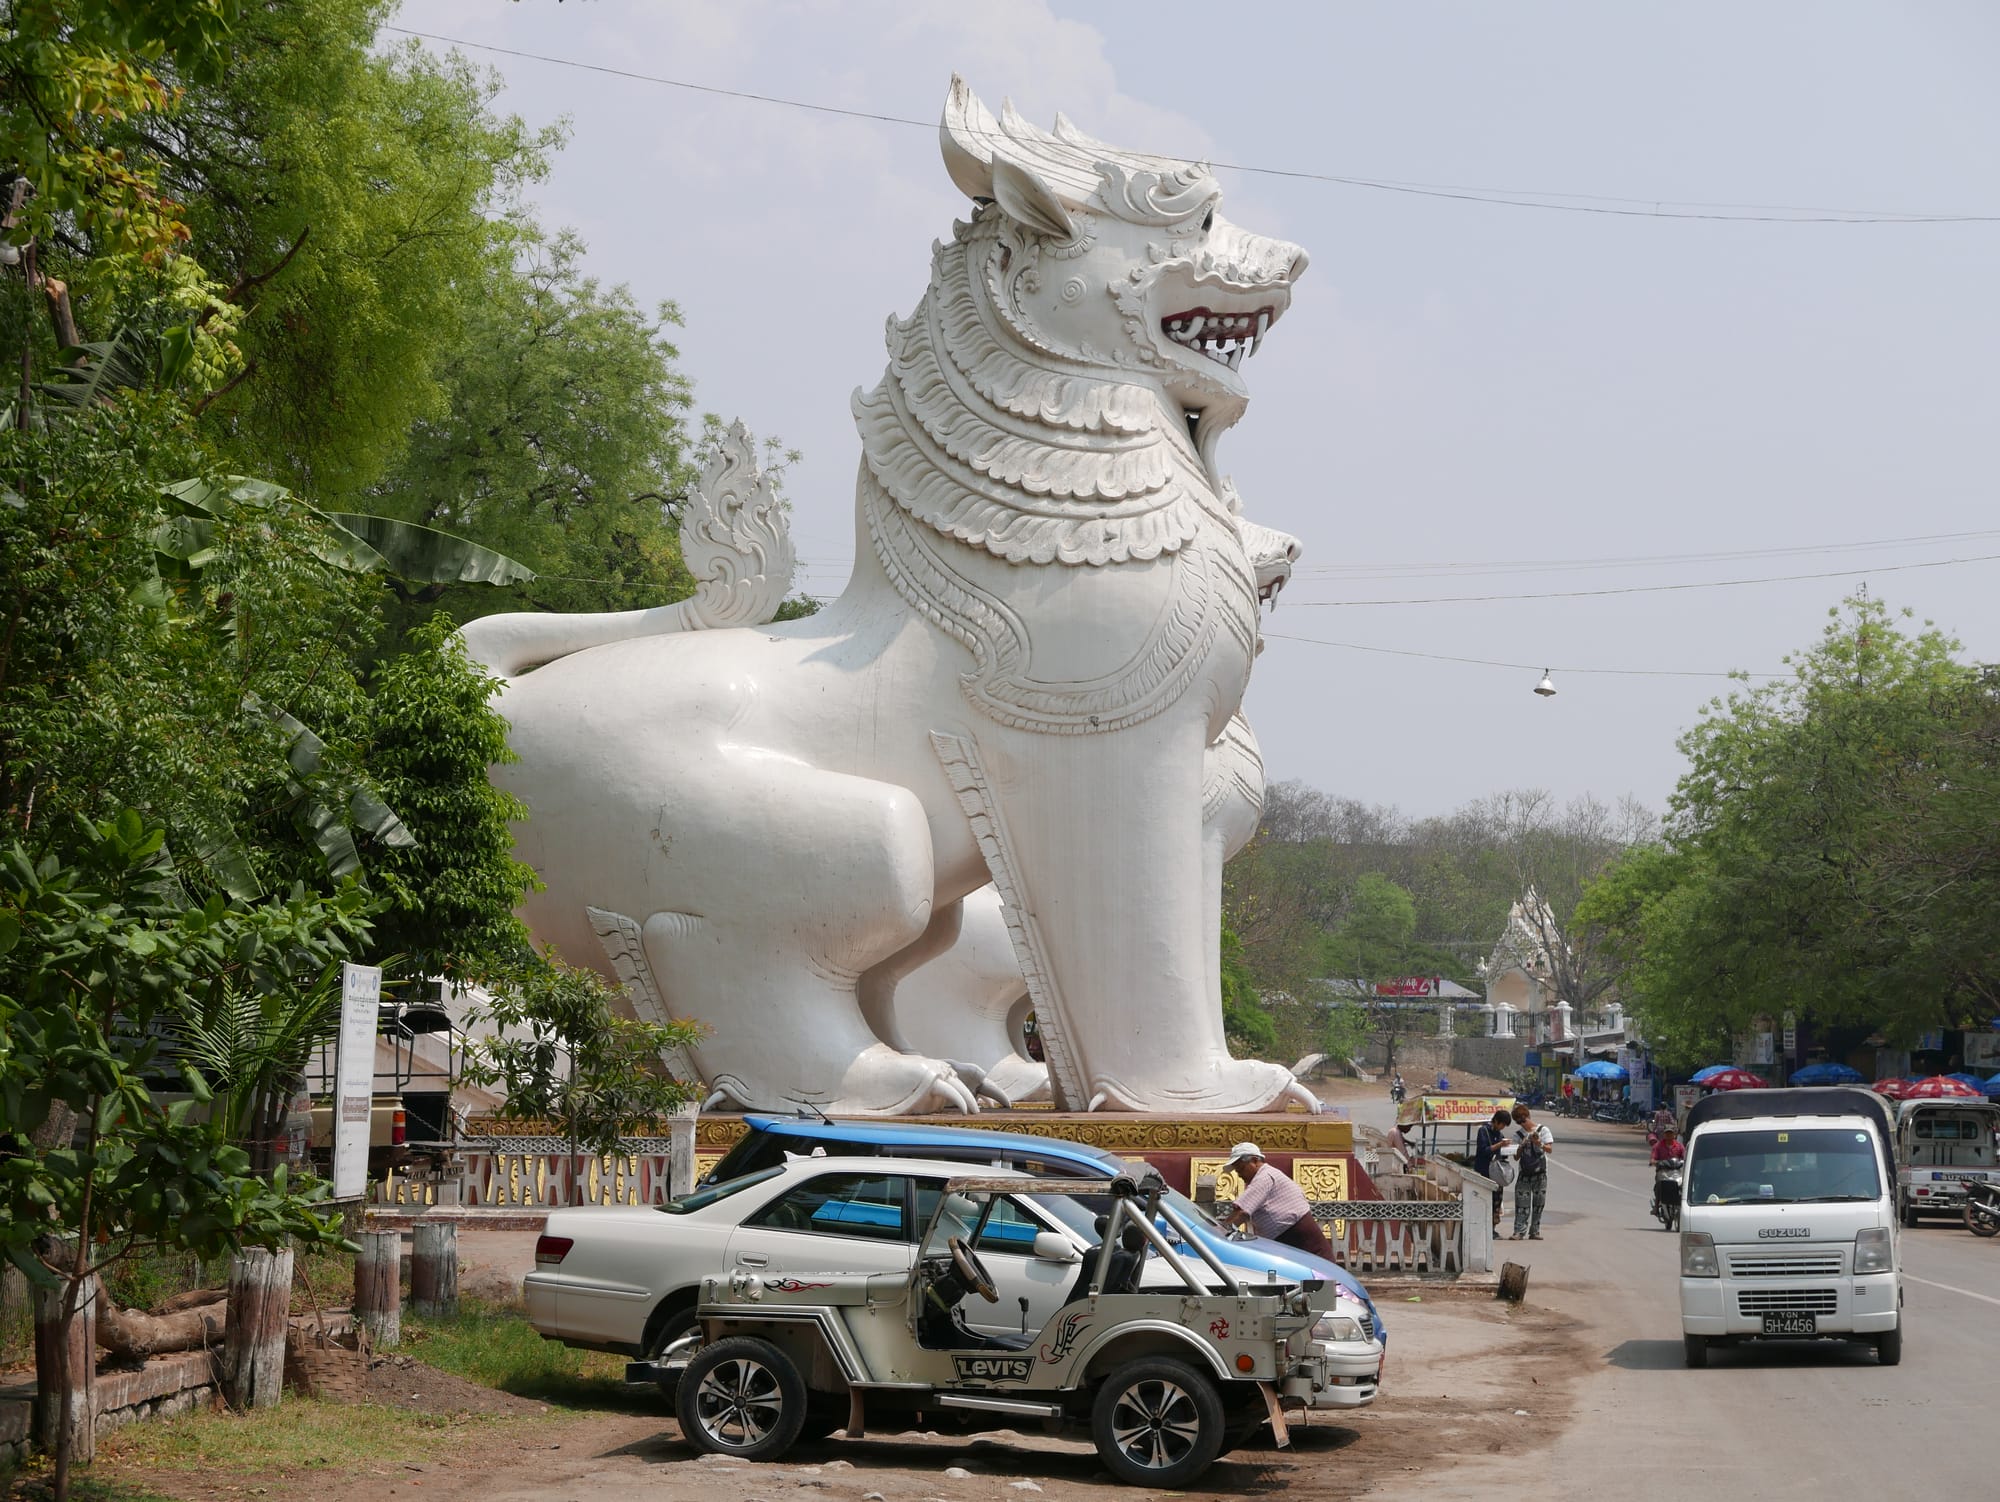 Photo by Author — large white sculpture at the start of the Mandalay Hill path